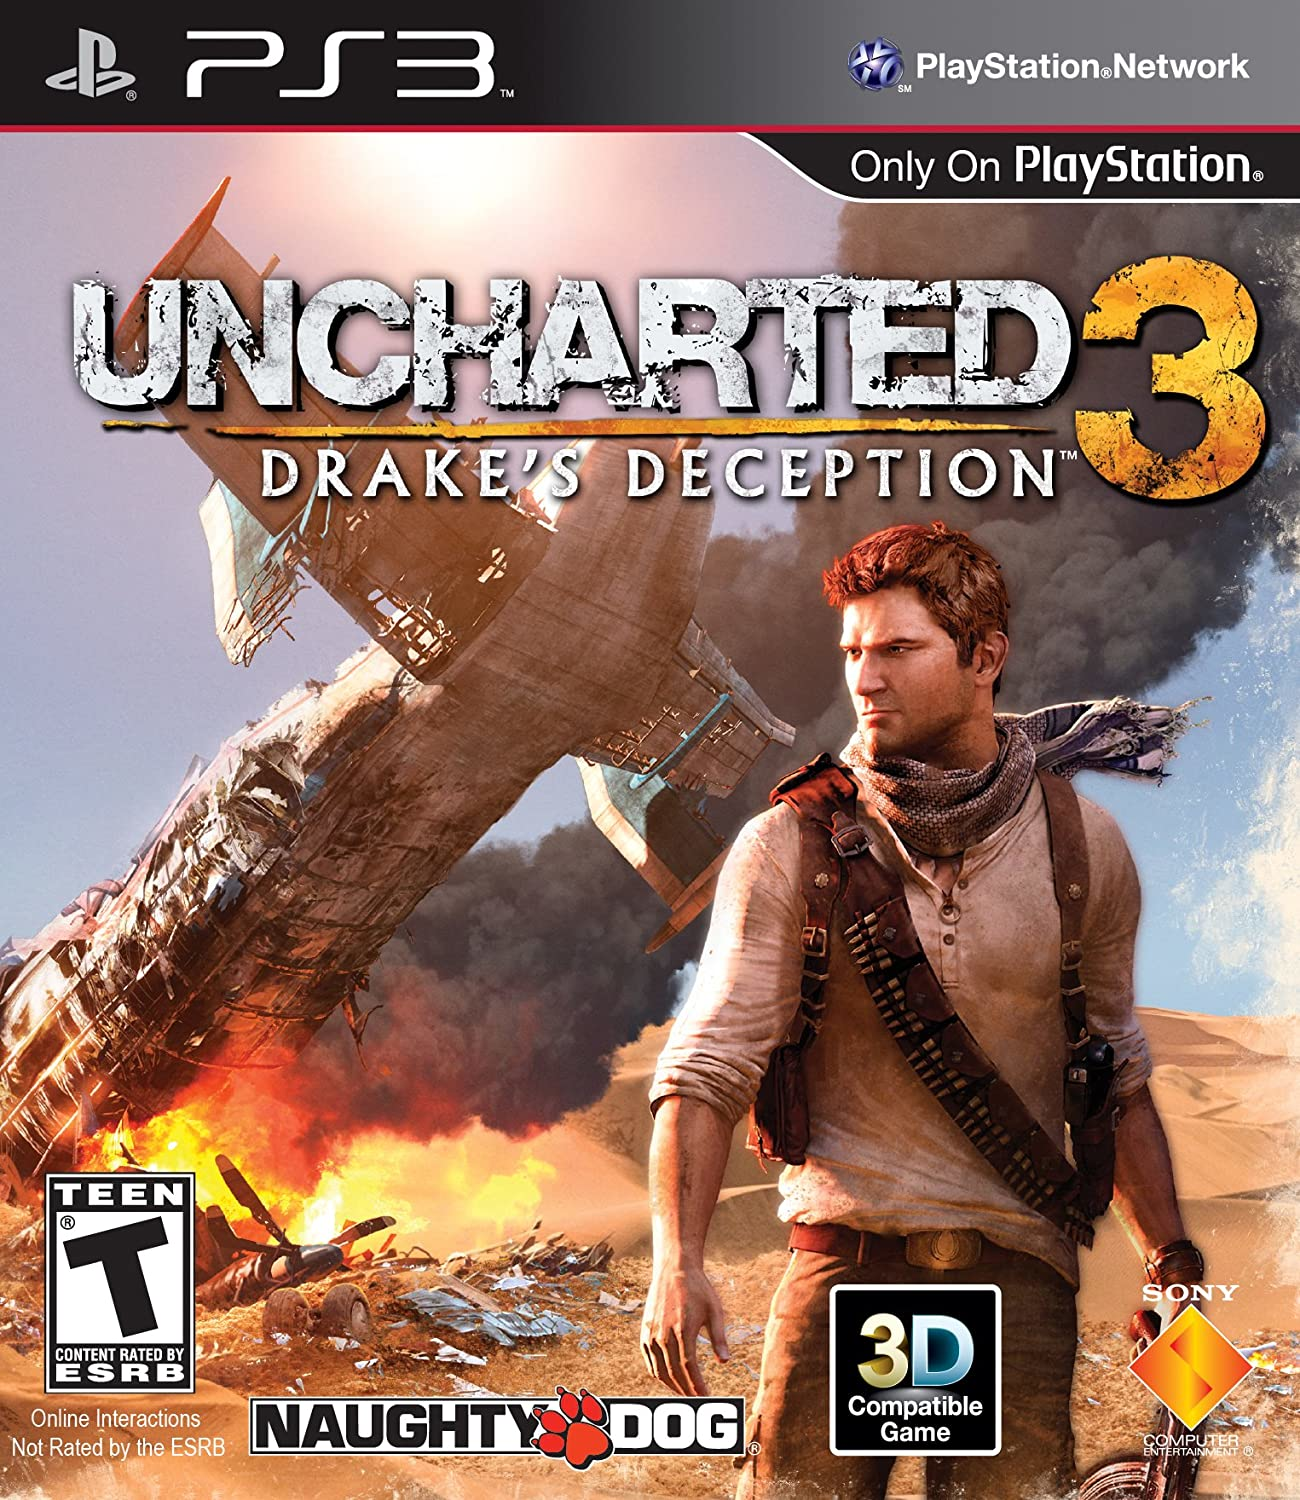 vorm Chinese kool opening Uncharted 3: Drake's Deception | Uncharted Wiki | Fandom